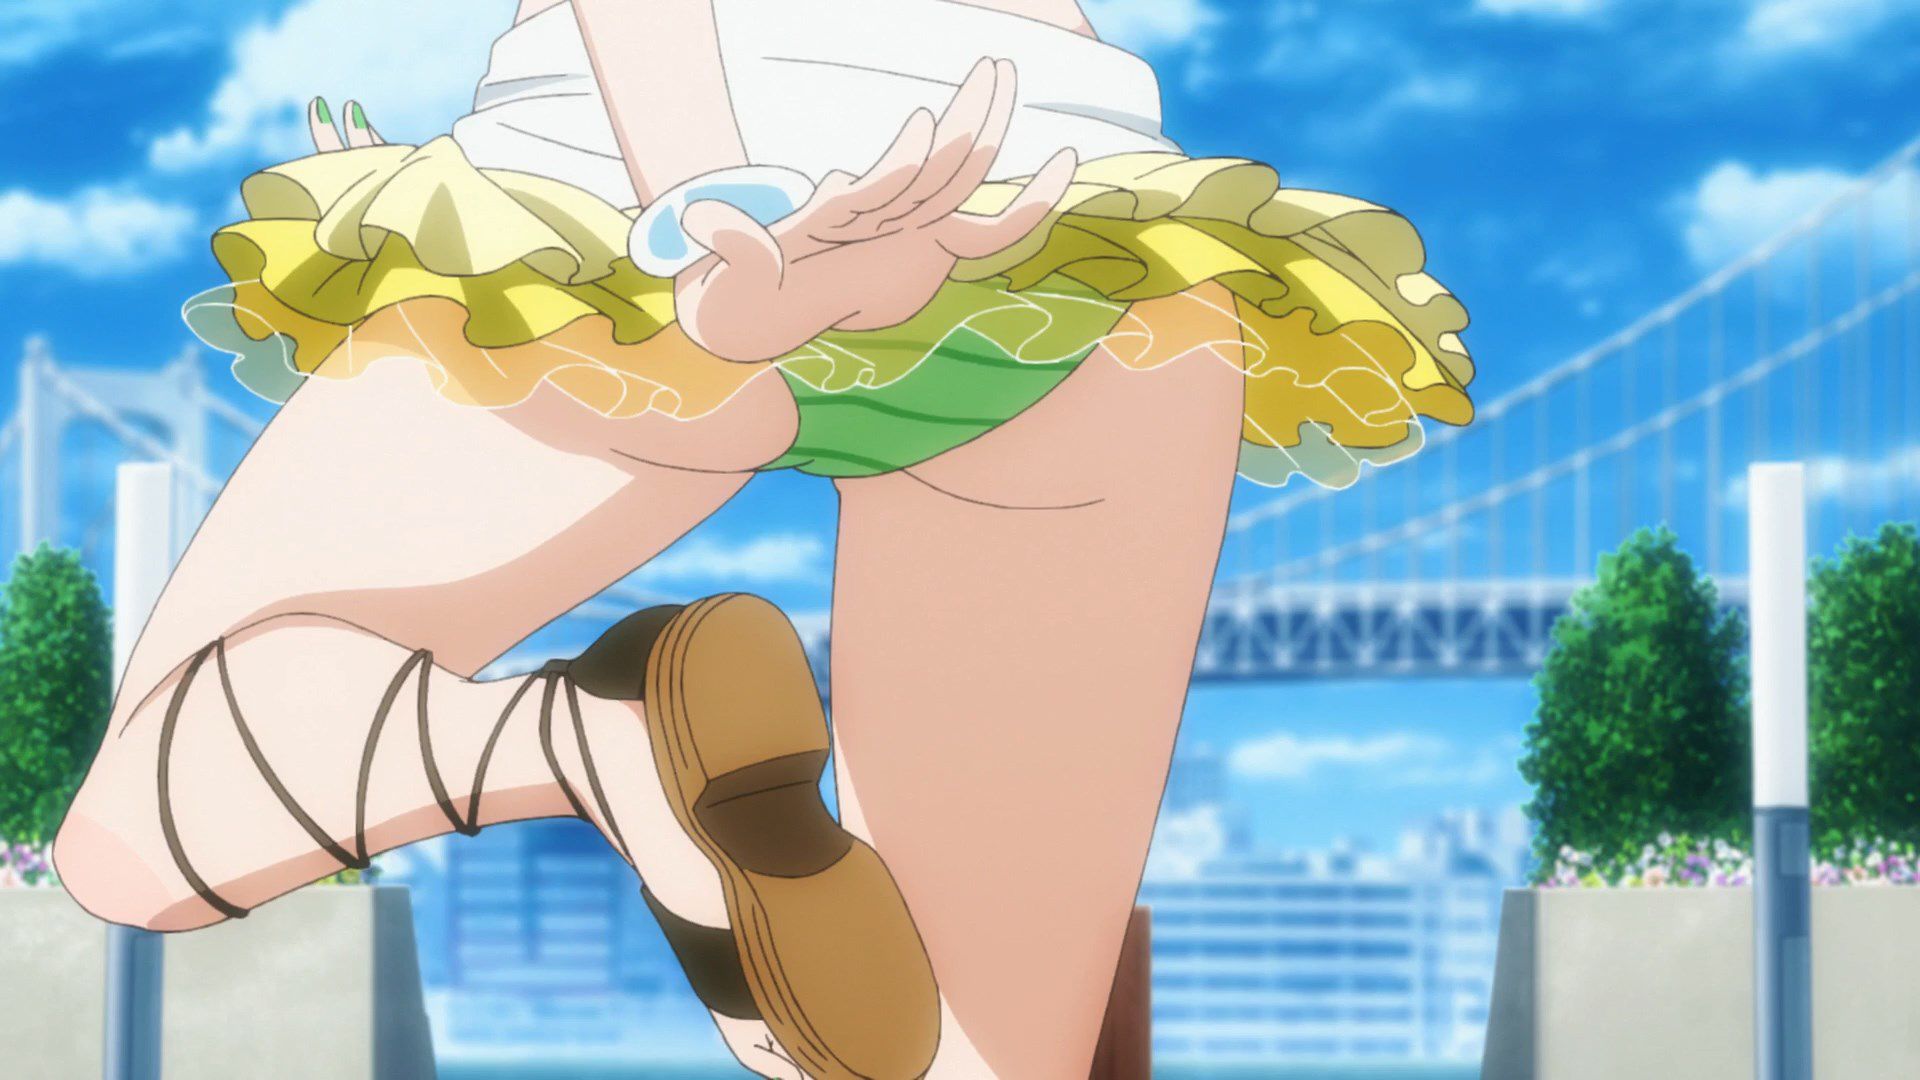 [God images] "love live! ' Μm ' PV's leg is too erotic everyone wakes up to a leg fetish of wwwww 10